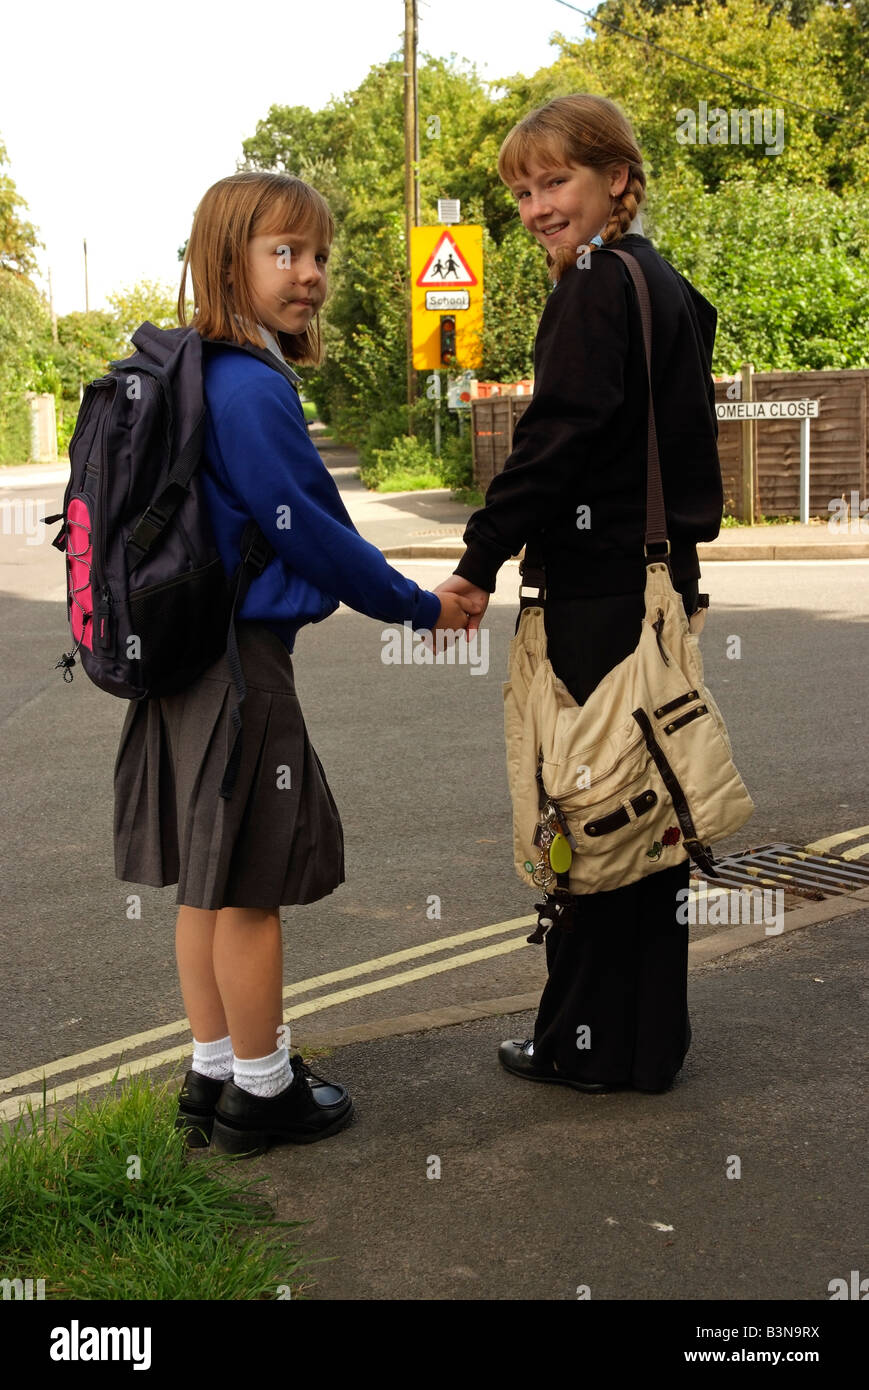 Schoolgirls in uniform wait to cross a road on the school route England UK Road safety wait at the kerb before crossing a road Stock Photo